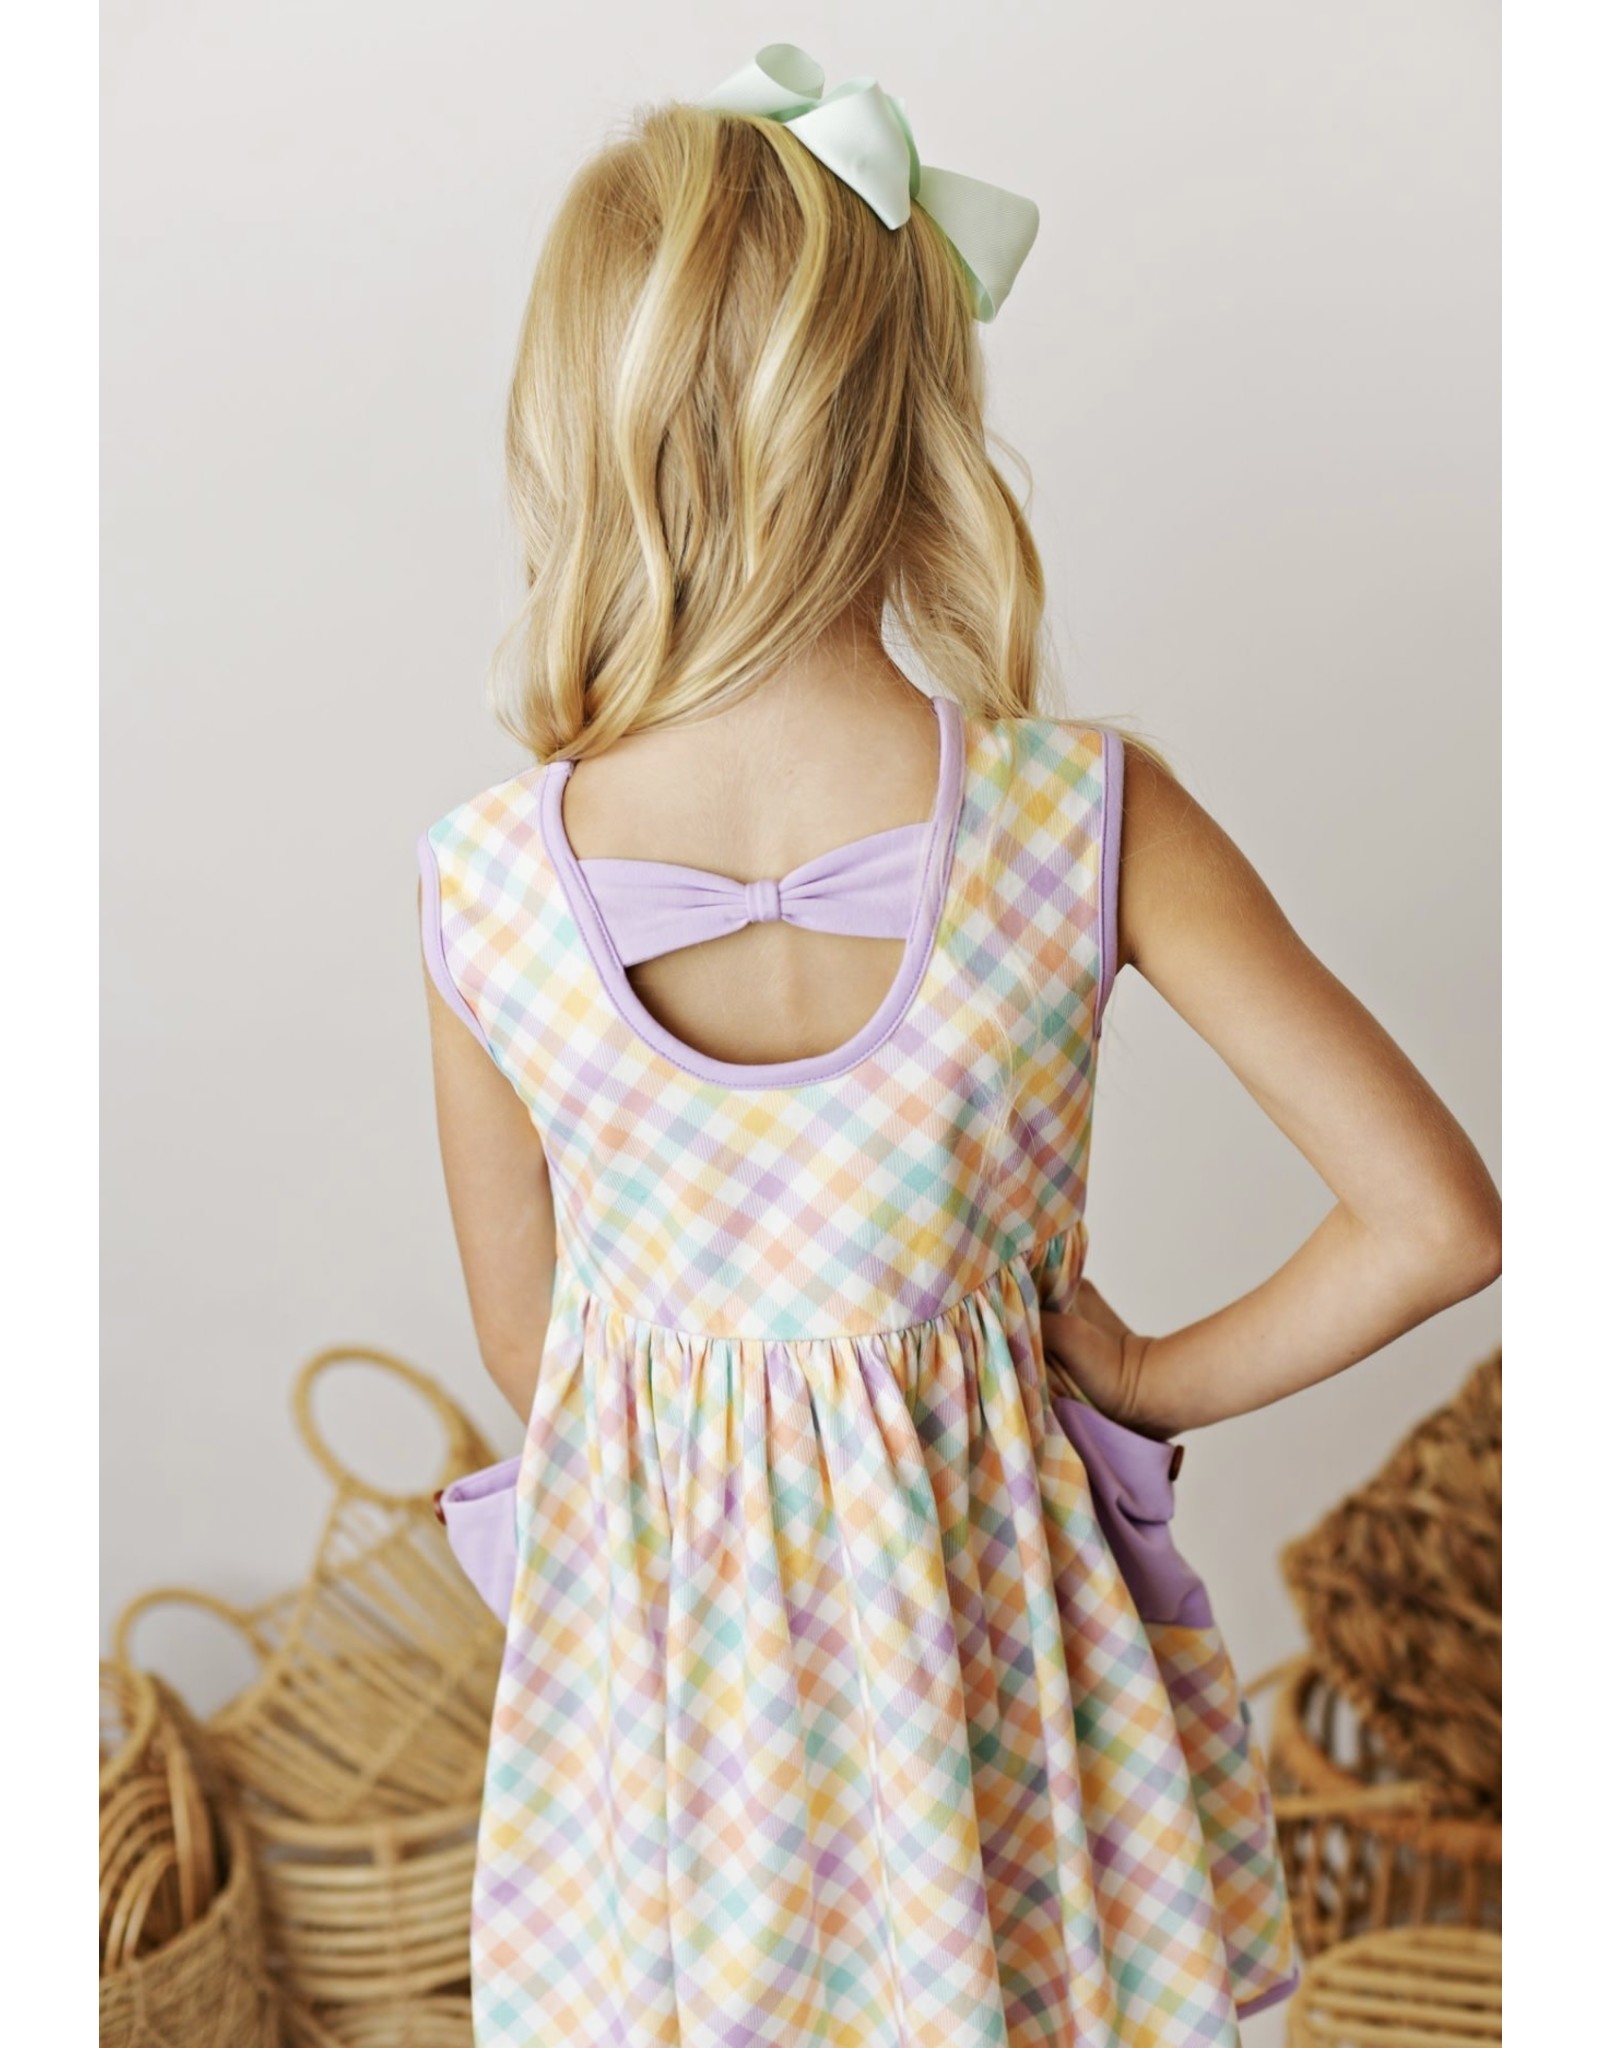 Swoon Baby Swoon Baby- Springster Gingham Petal Bow Pocket Dress